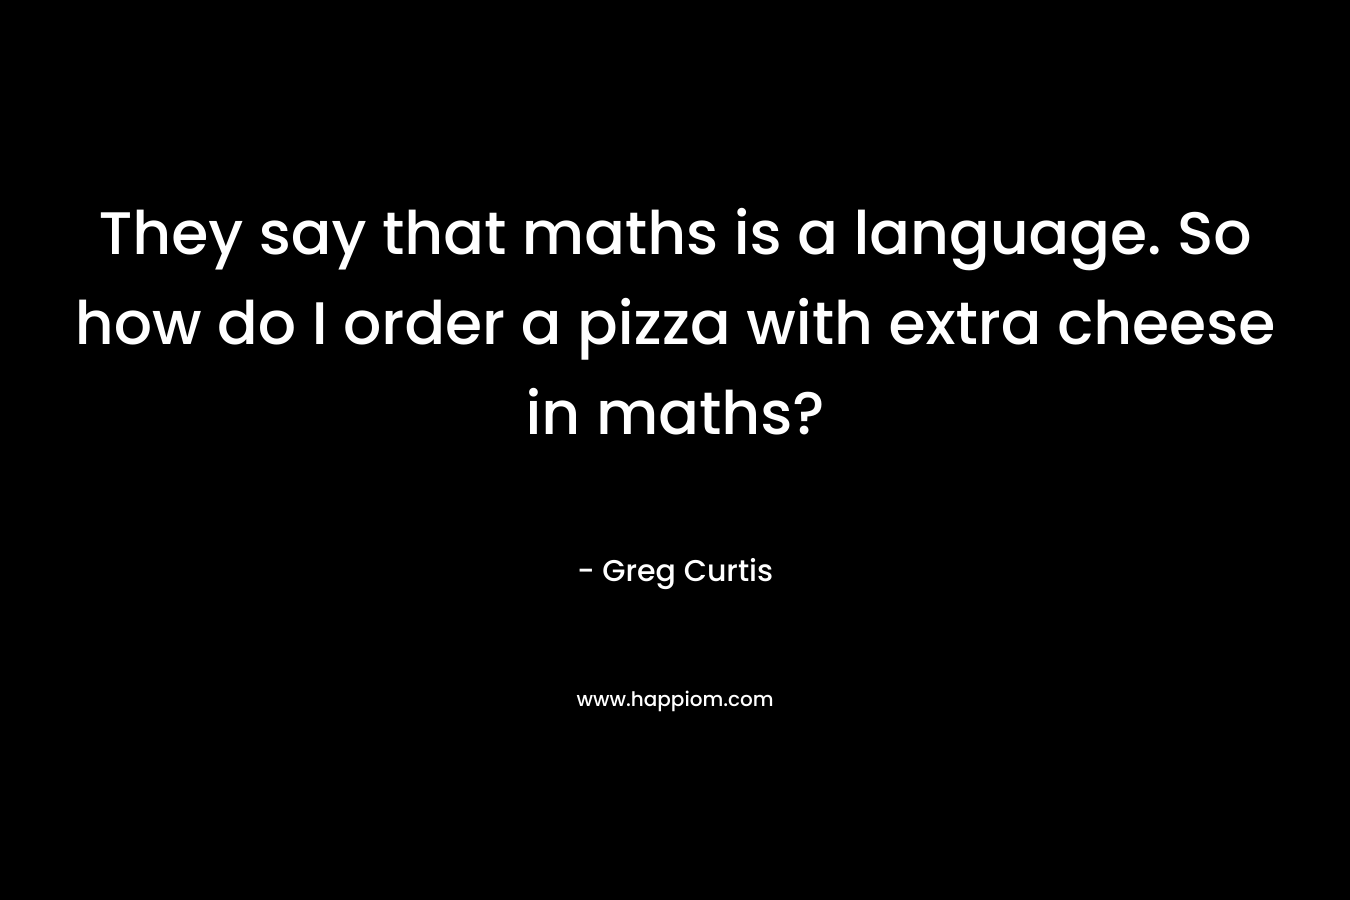 They say that maths is a language. So how do I order a pizza with extra cheese in maths?